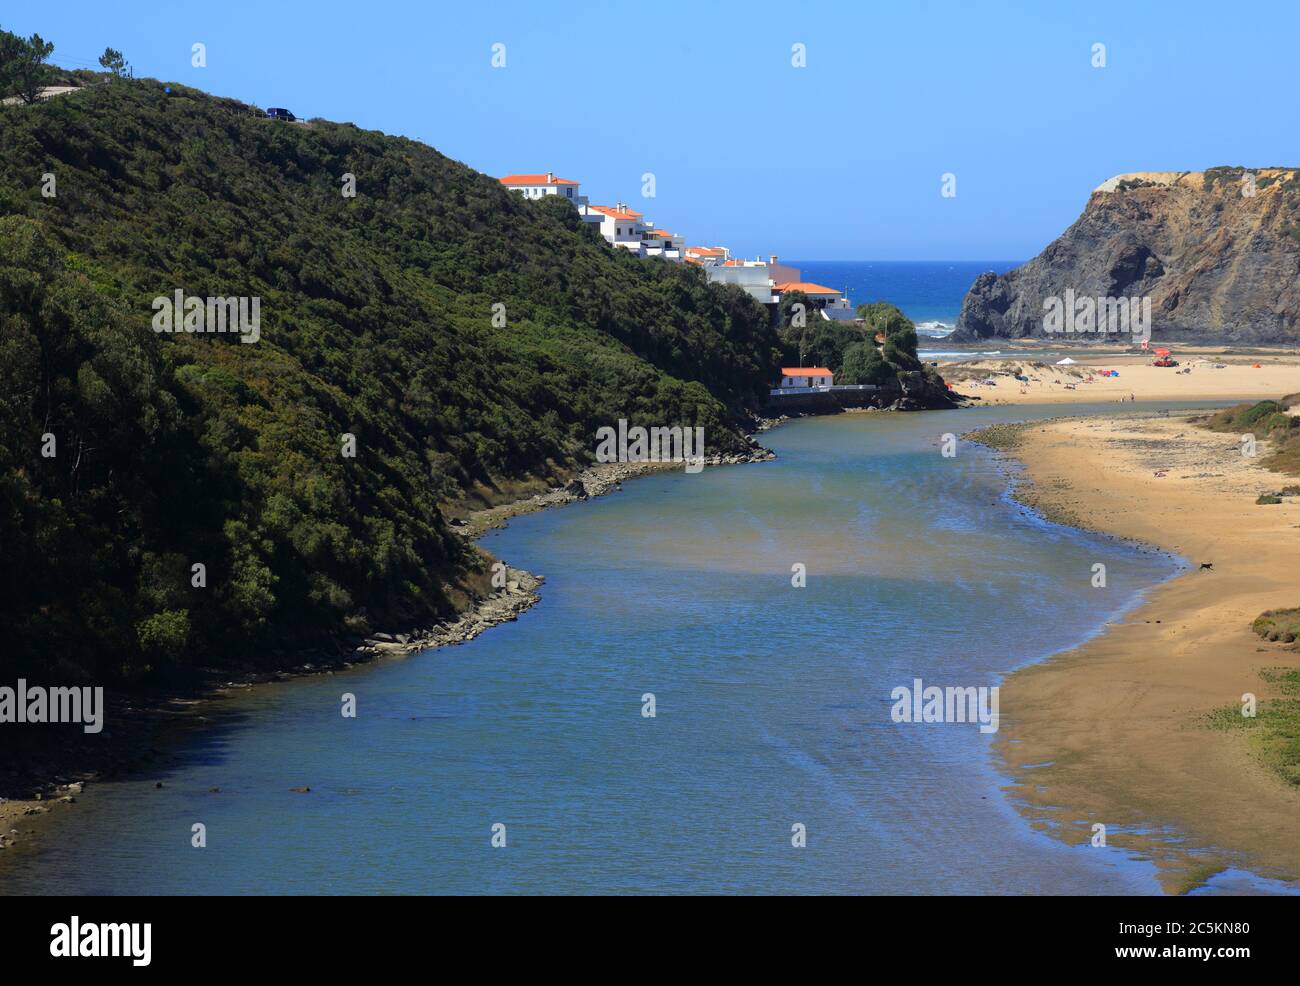 Portugal, Algarve Region, Odeceixe, South-West Alentejo and Vicentine Coast Natural Park cliff top view of the Odeceixe beach and estuary. Stock Photo